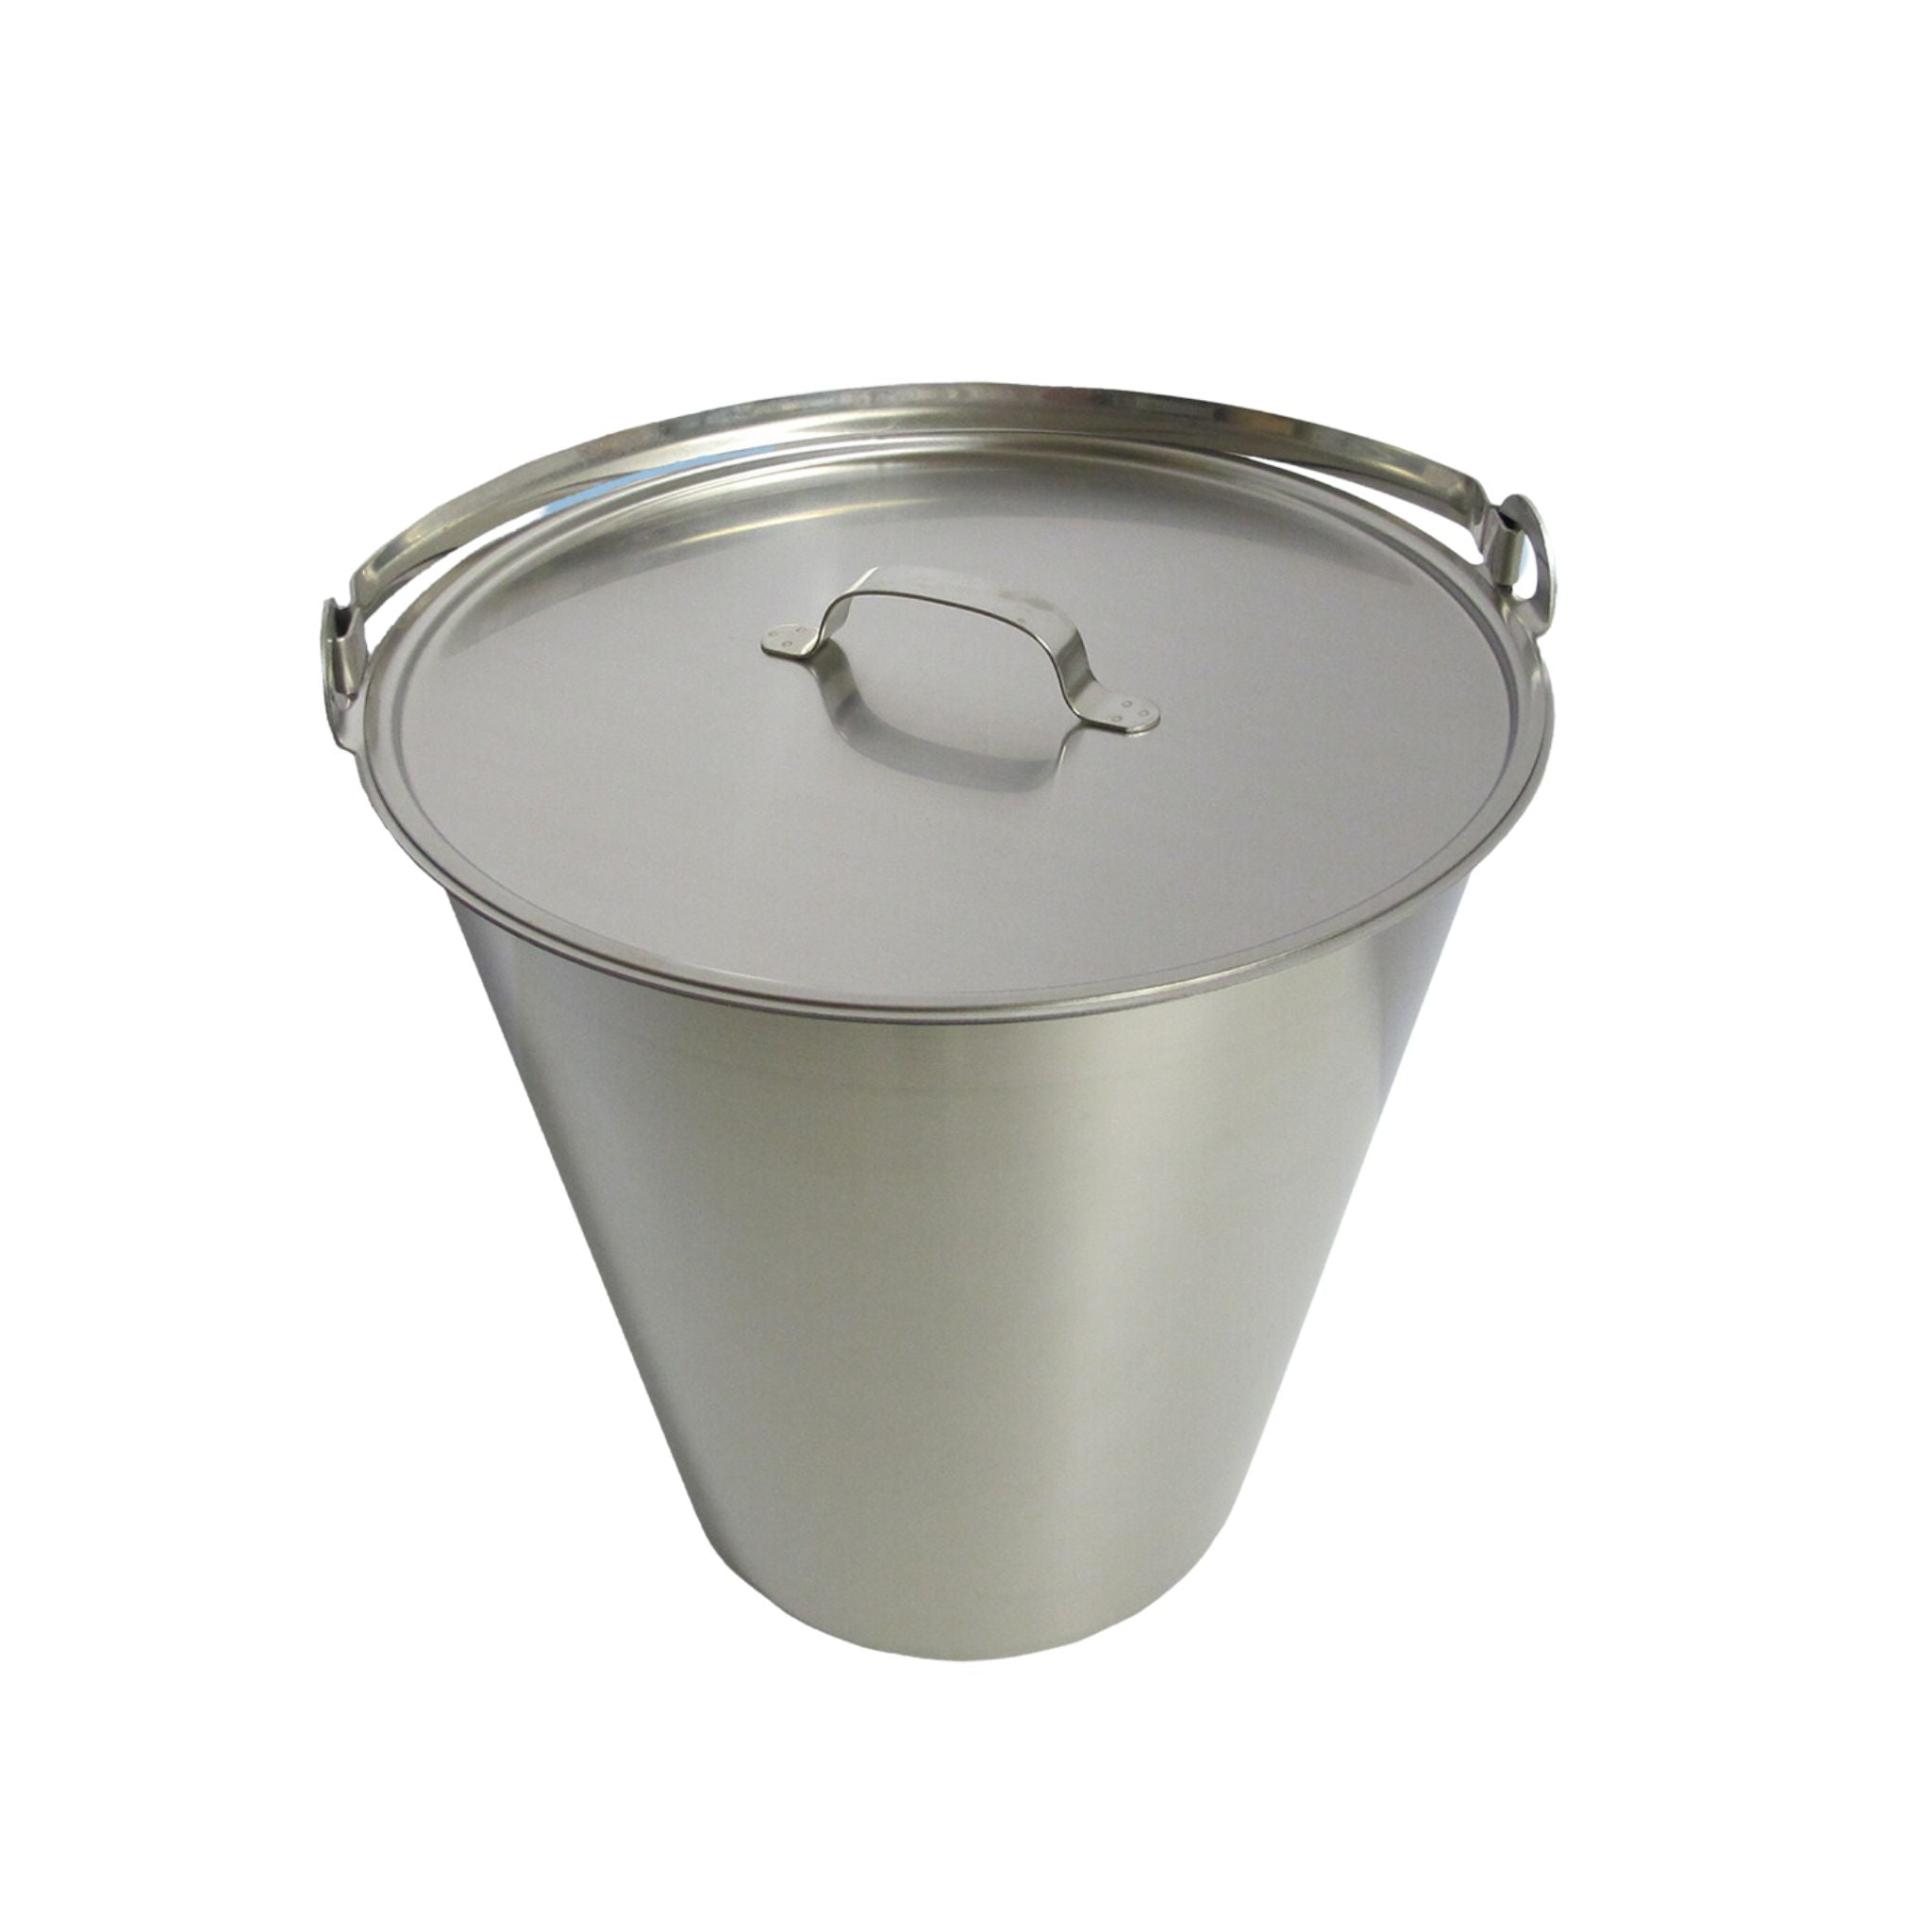 Stainless steel bucket with lid